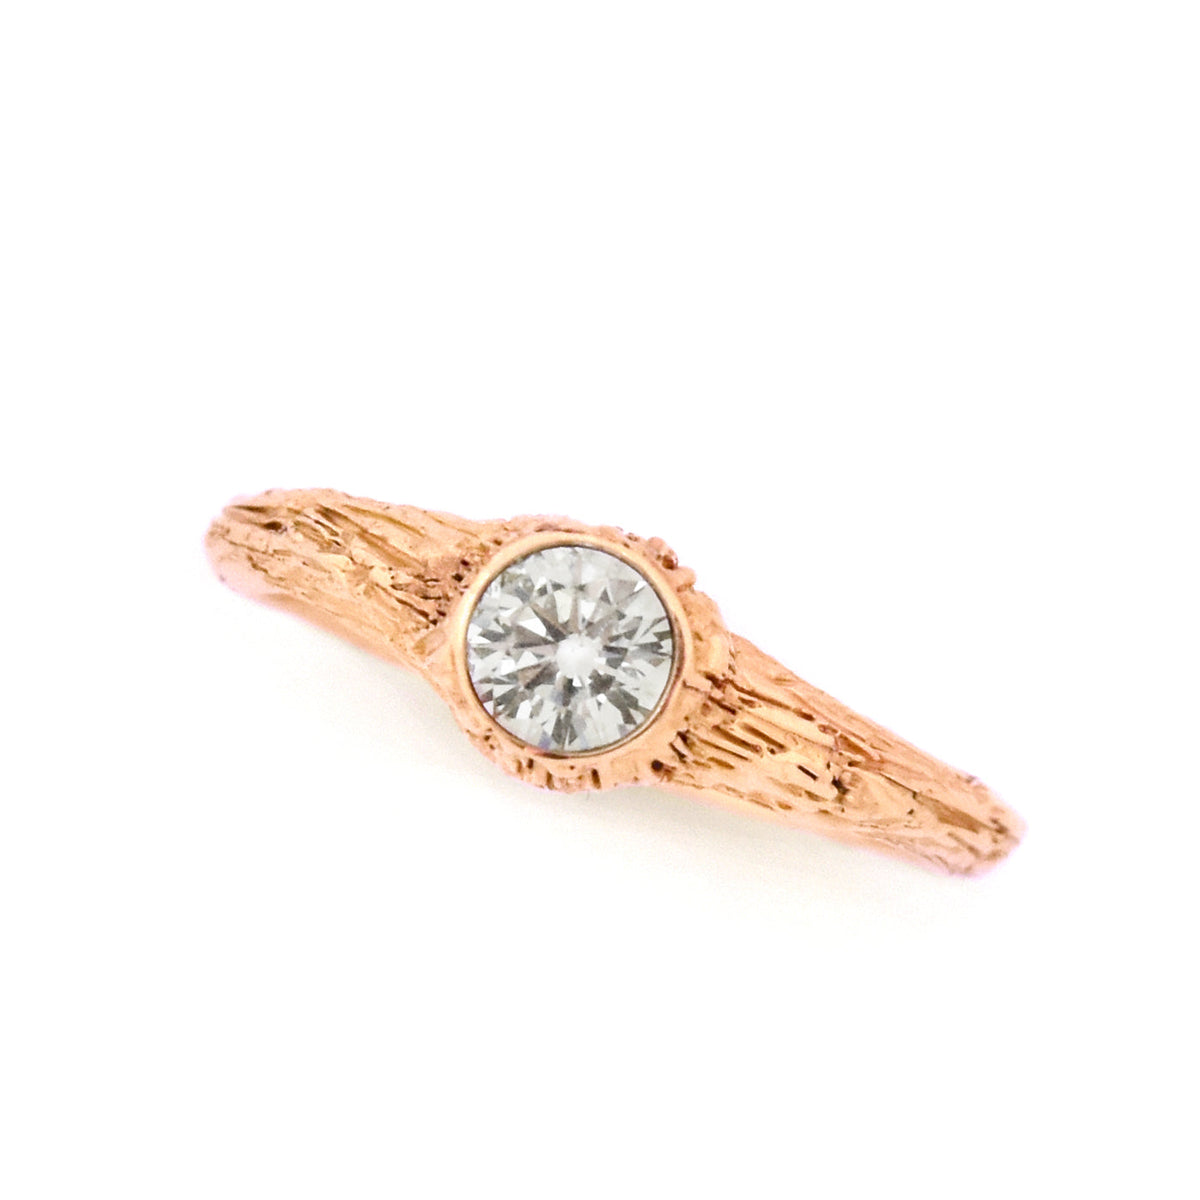 Gold Heartwood Diamond Ring - your choice of 5mm stone & gold - Wedding Ring Recycled Diamond / 14K Rose Gold Recycled Diamond / 14K Yellow Gold 6324 - handmade by Beth Millner Jewelry